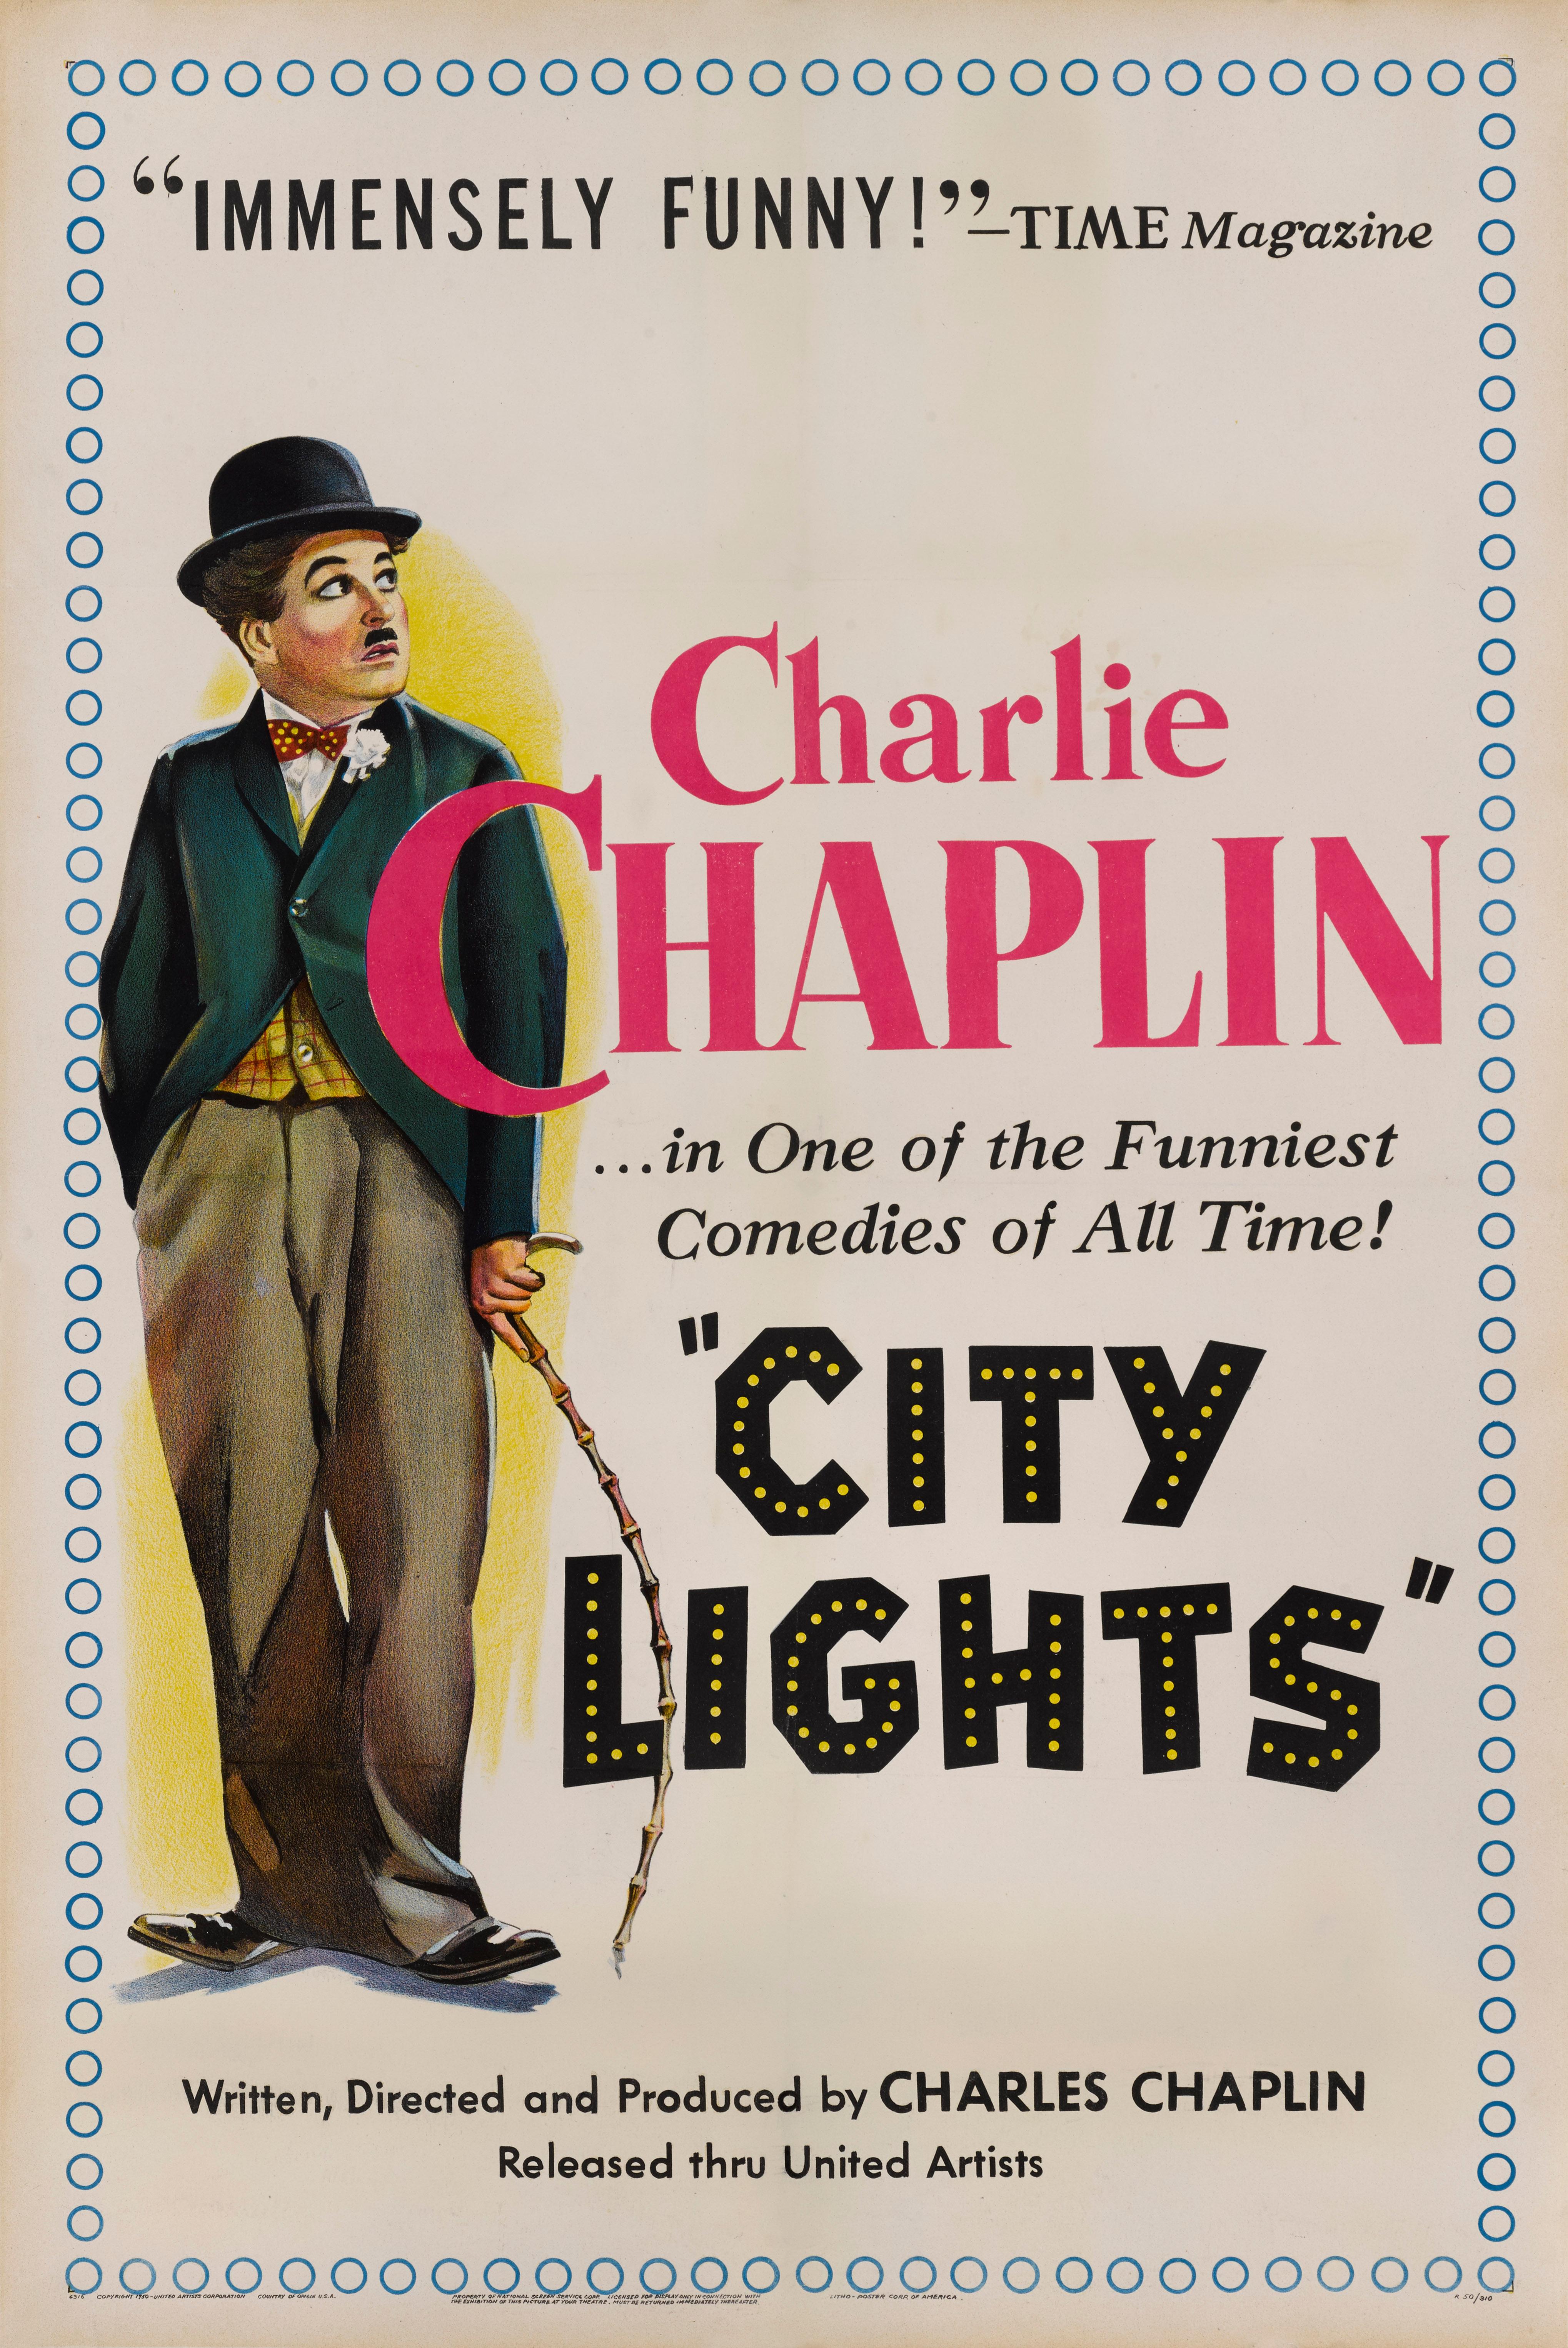 Original US film poster for the 1950s re-release of the 1931 silent Charlie Chaplin comedy romance.